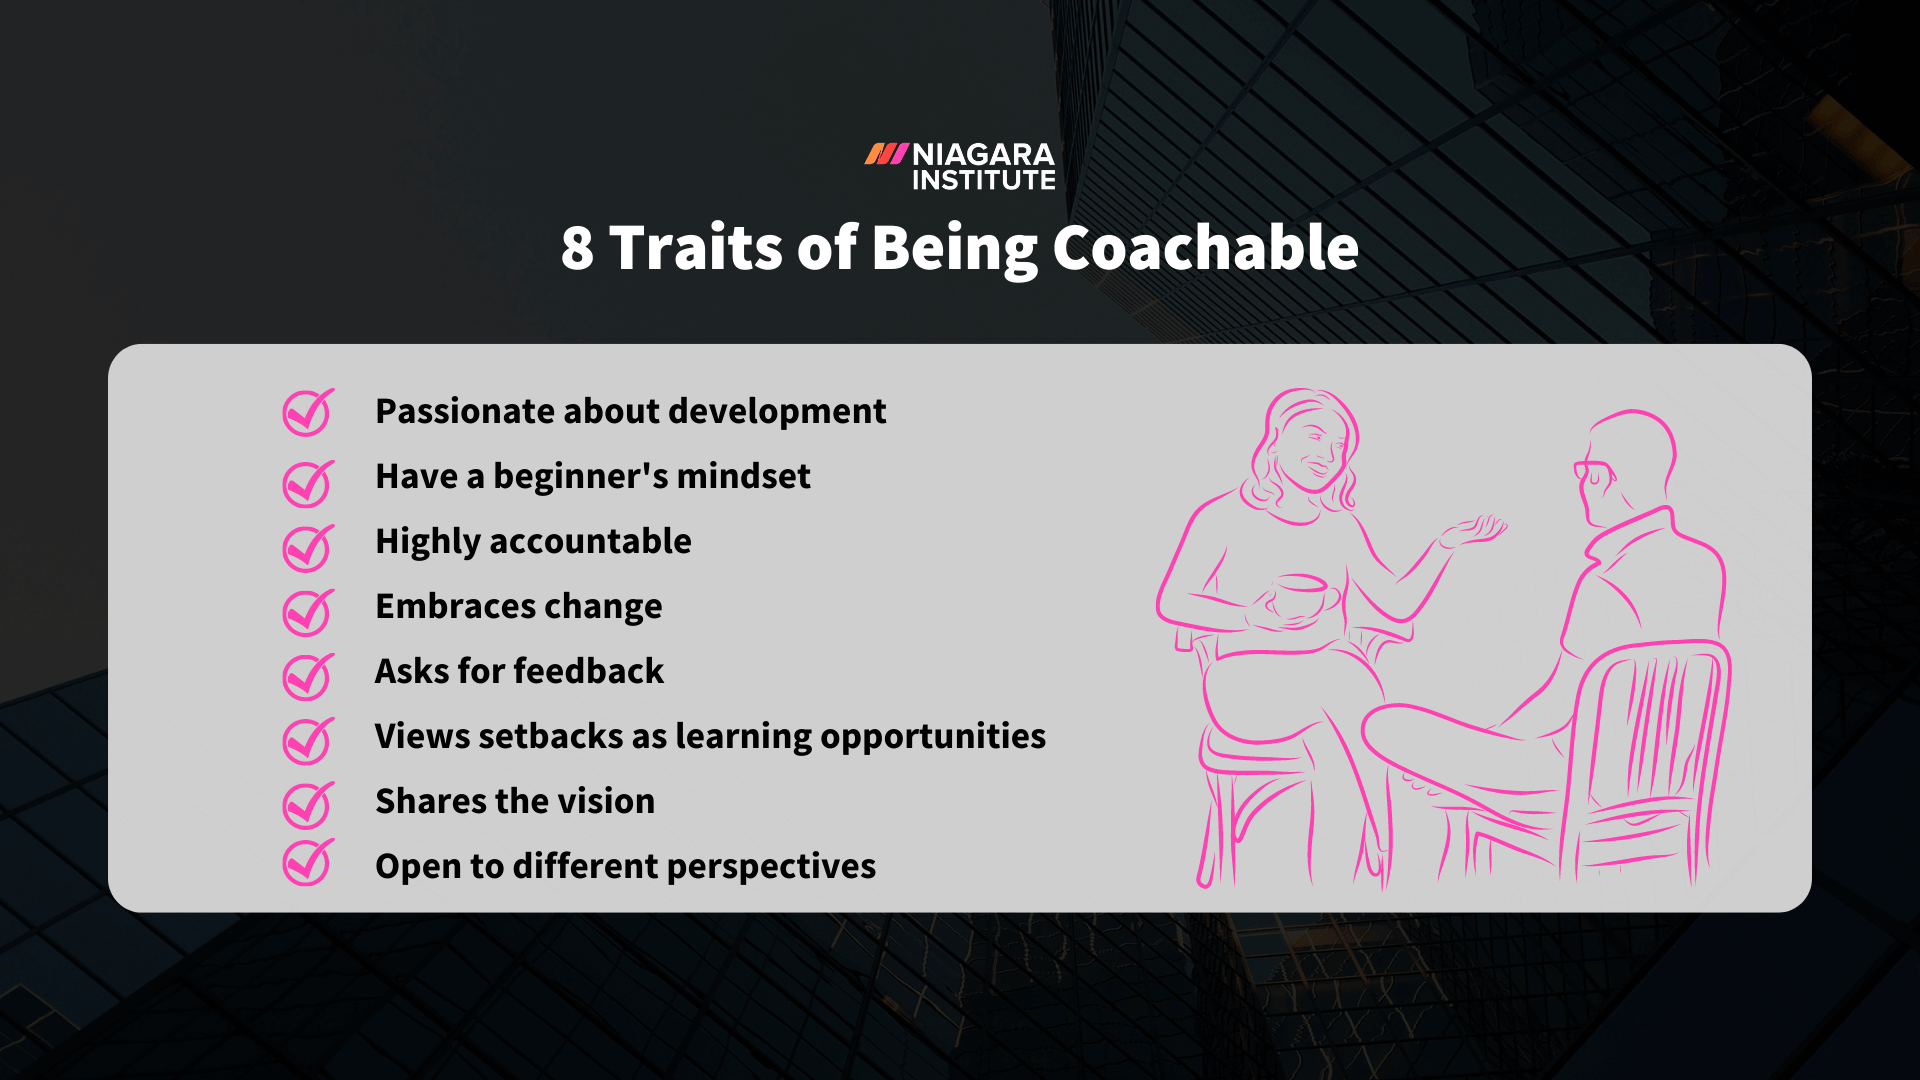 8 Traits of Being Coachable - Niagara Institute (1)